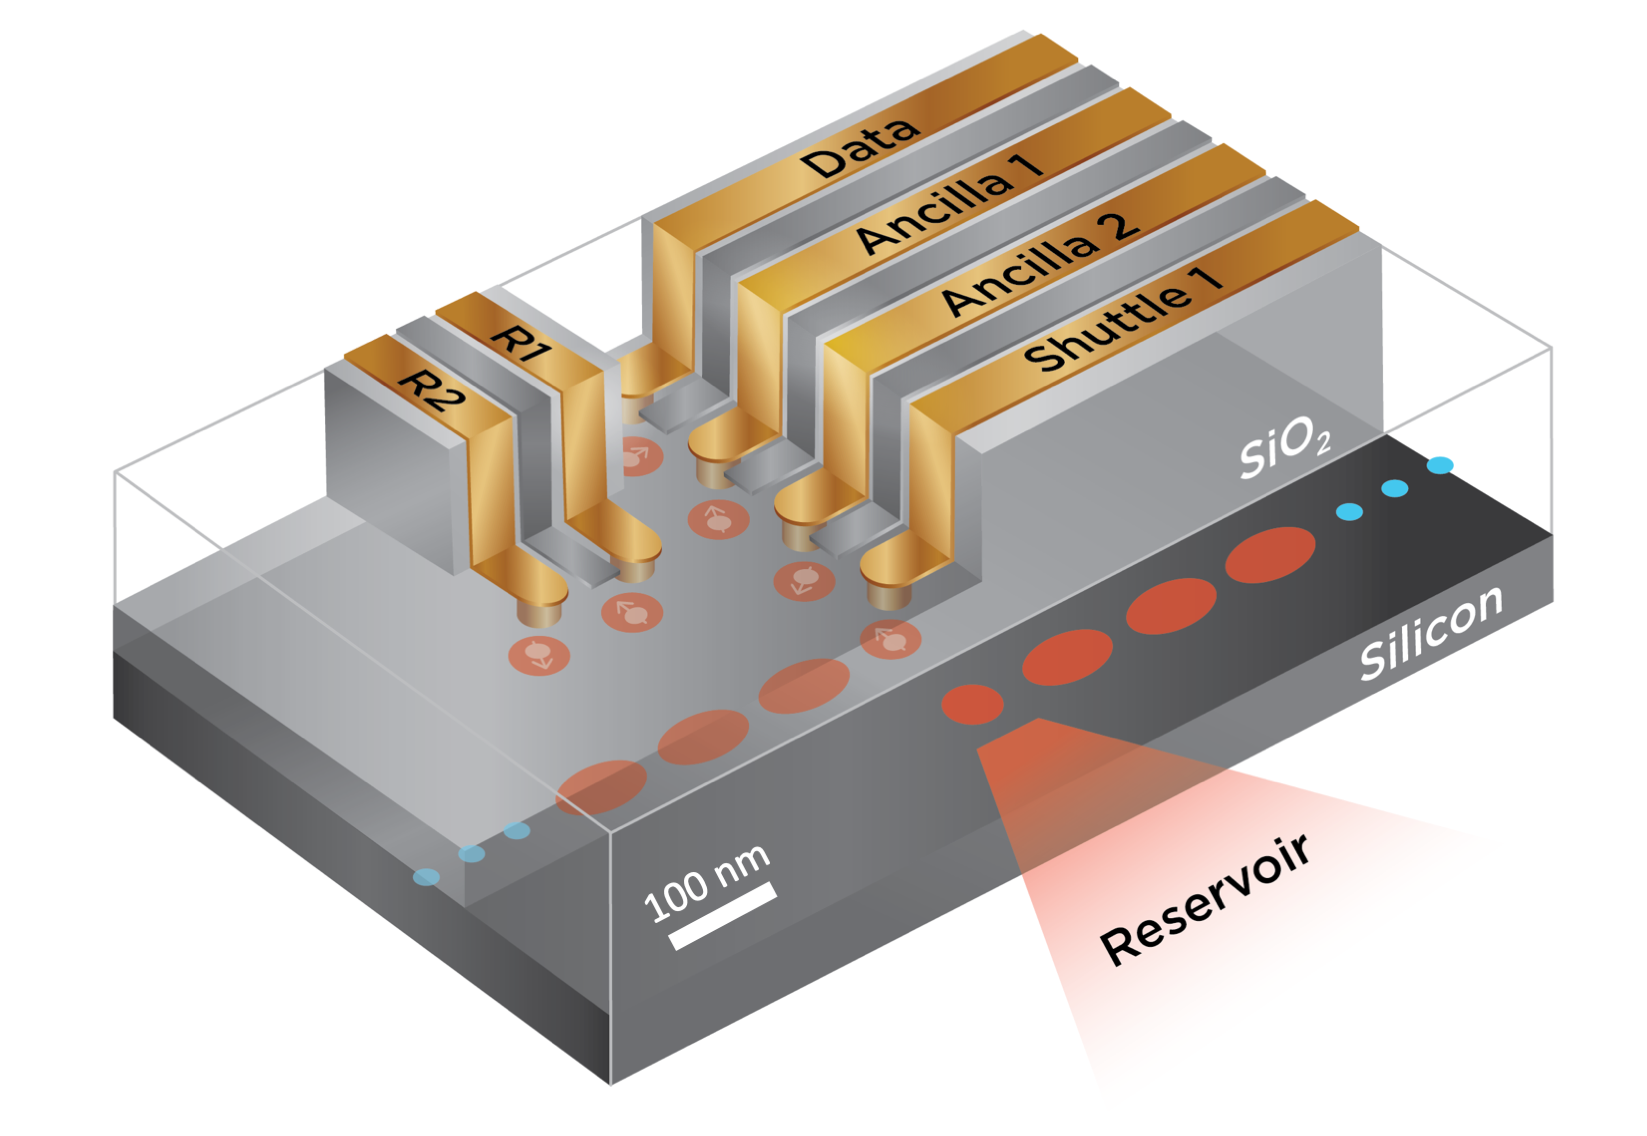 fig3_scalebar: New paper on silicon quantum computing architecture is published